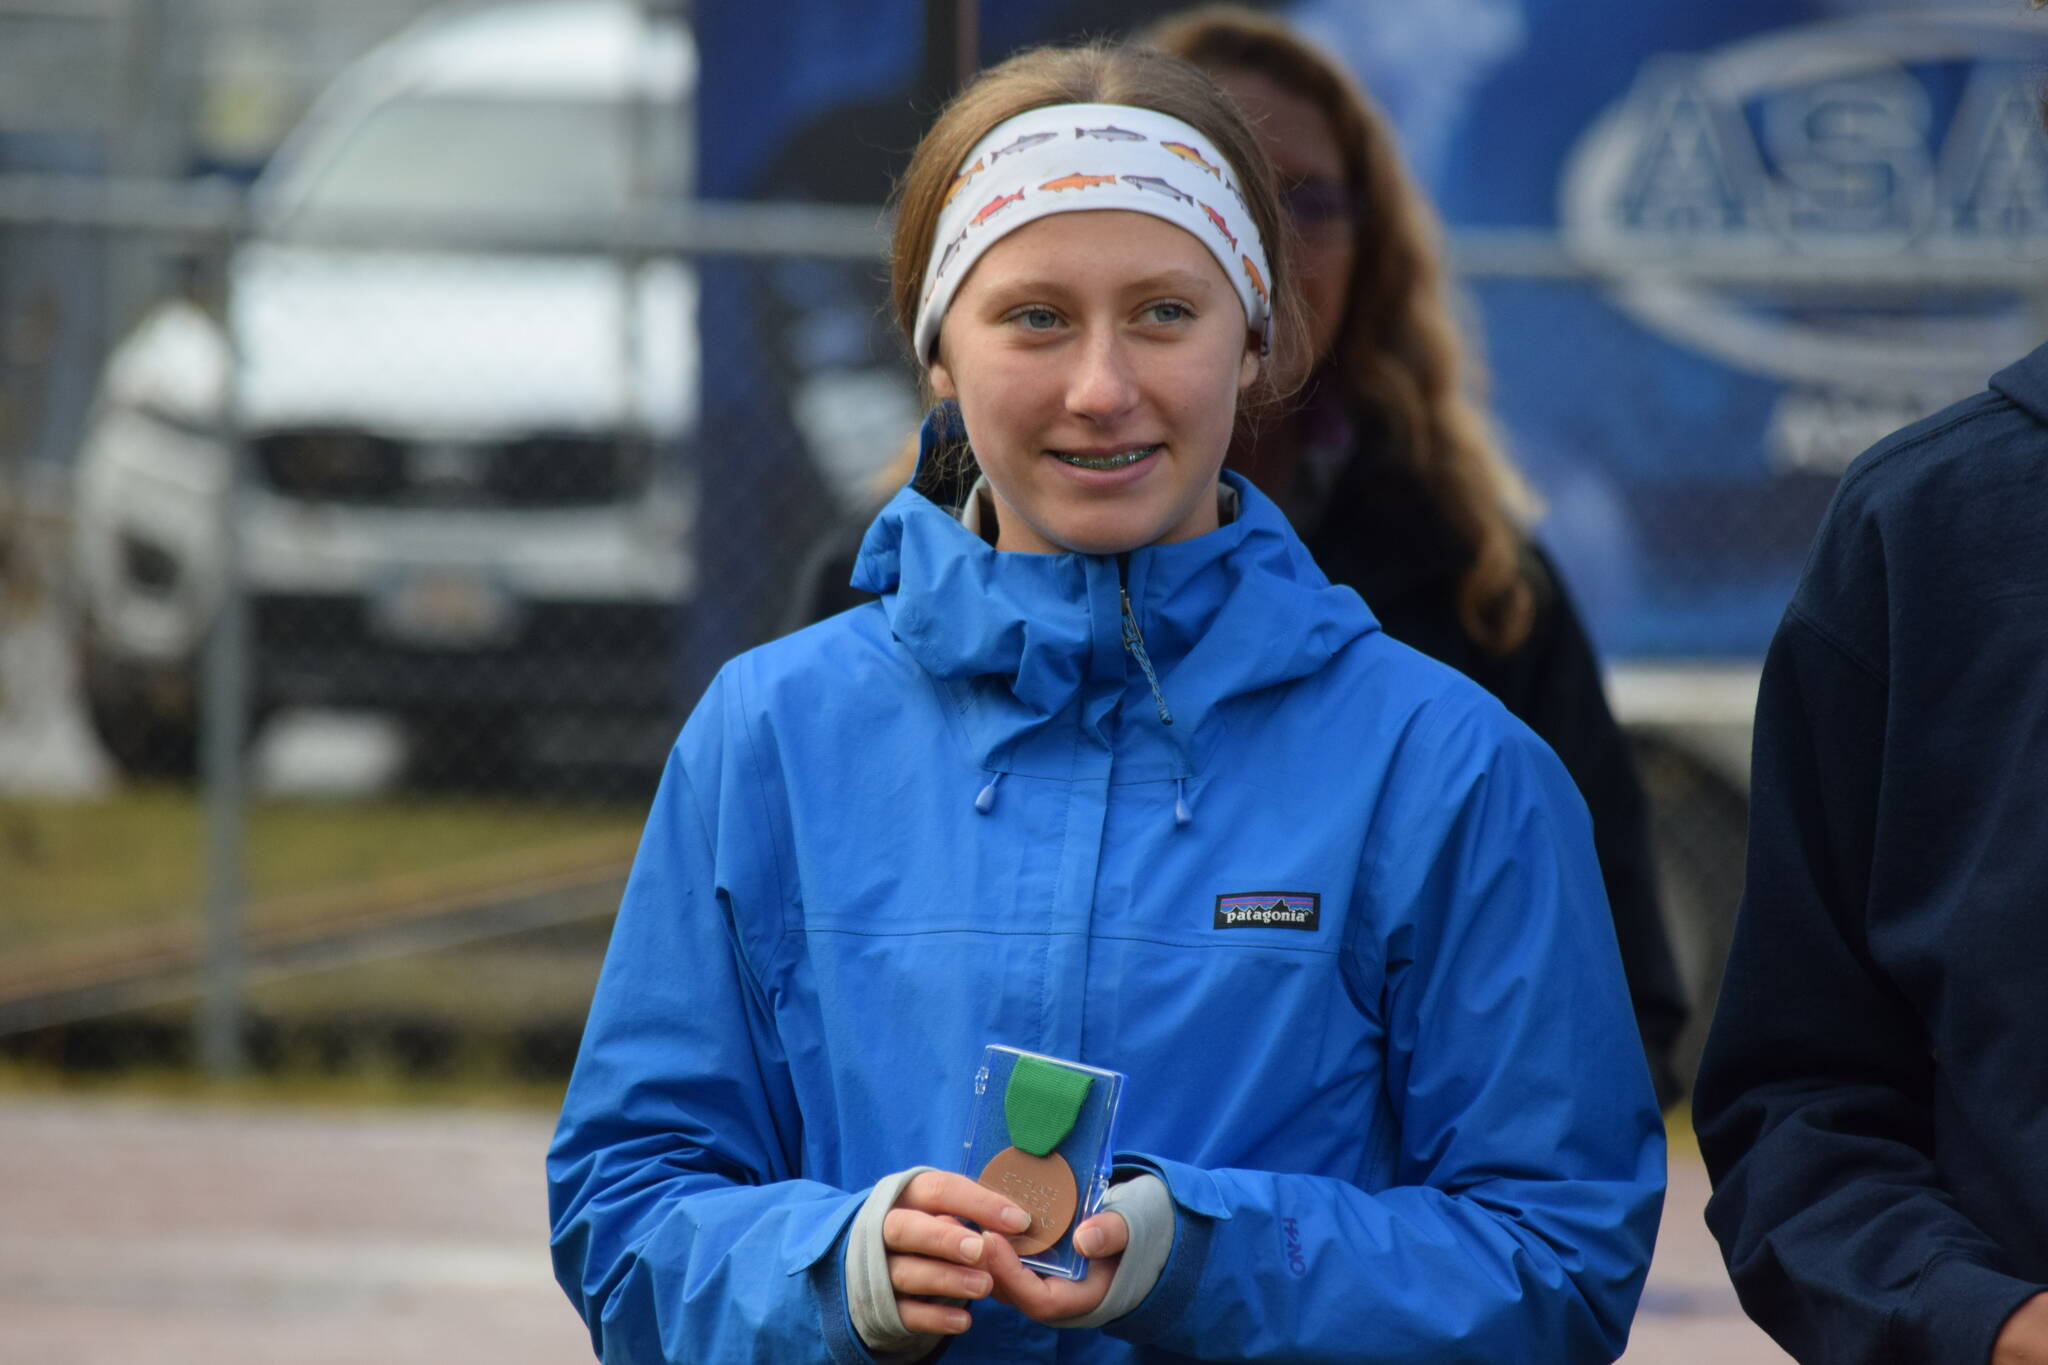 Hailey Ingalls of Seward gets a medal at the Division II state cross country championship at Bartlett High School in Anchorage, Alaska on Saturday, Oct. 9, 2021 for her fifth place finish. (Camille Botello/Peninsula Clarion)